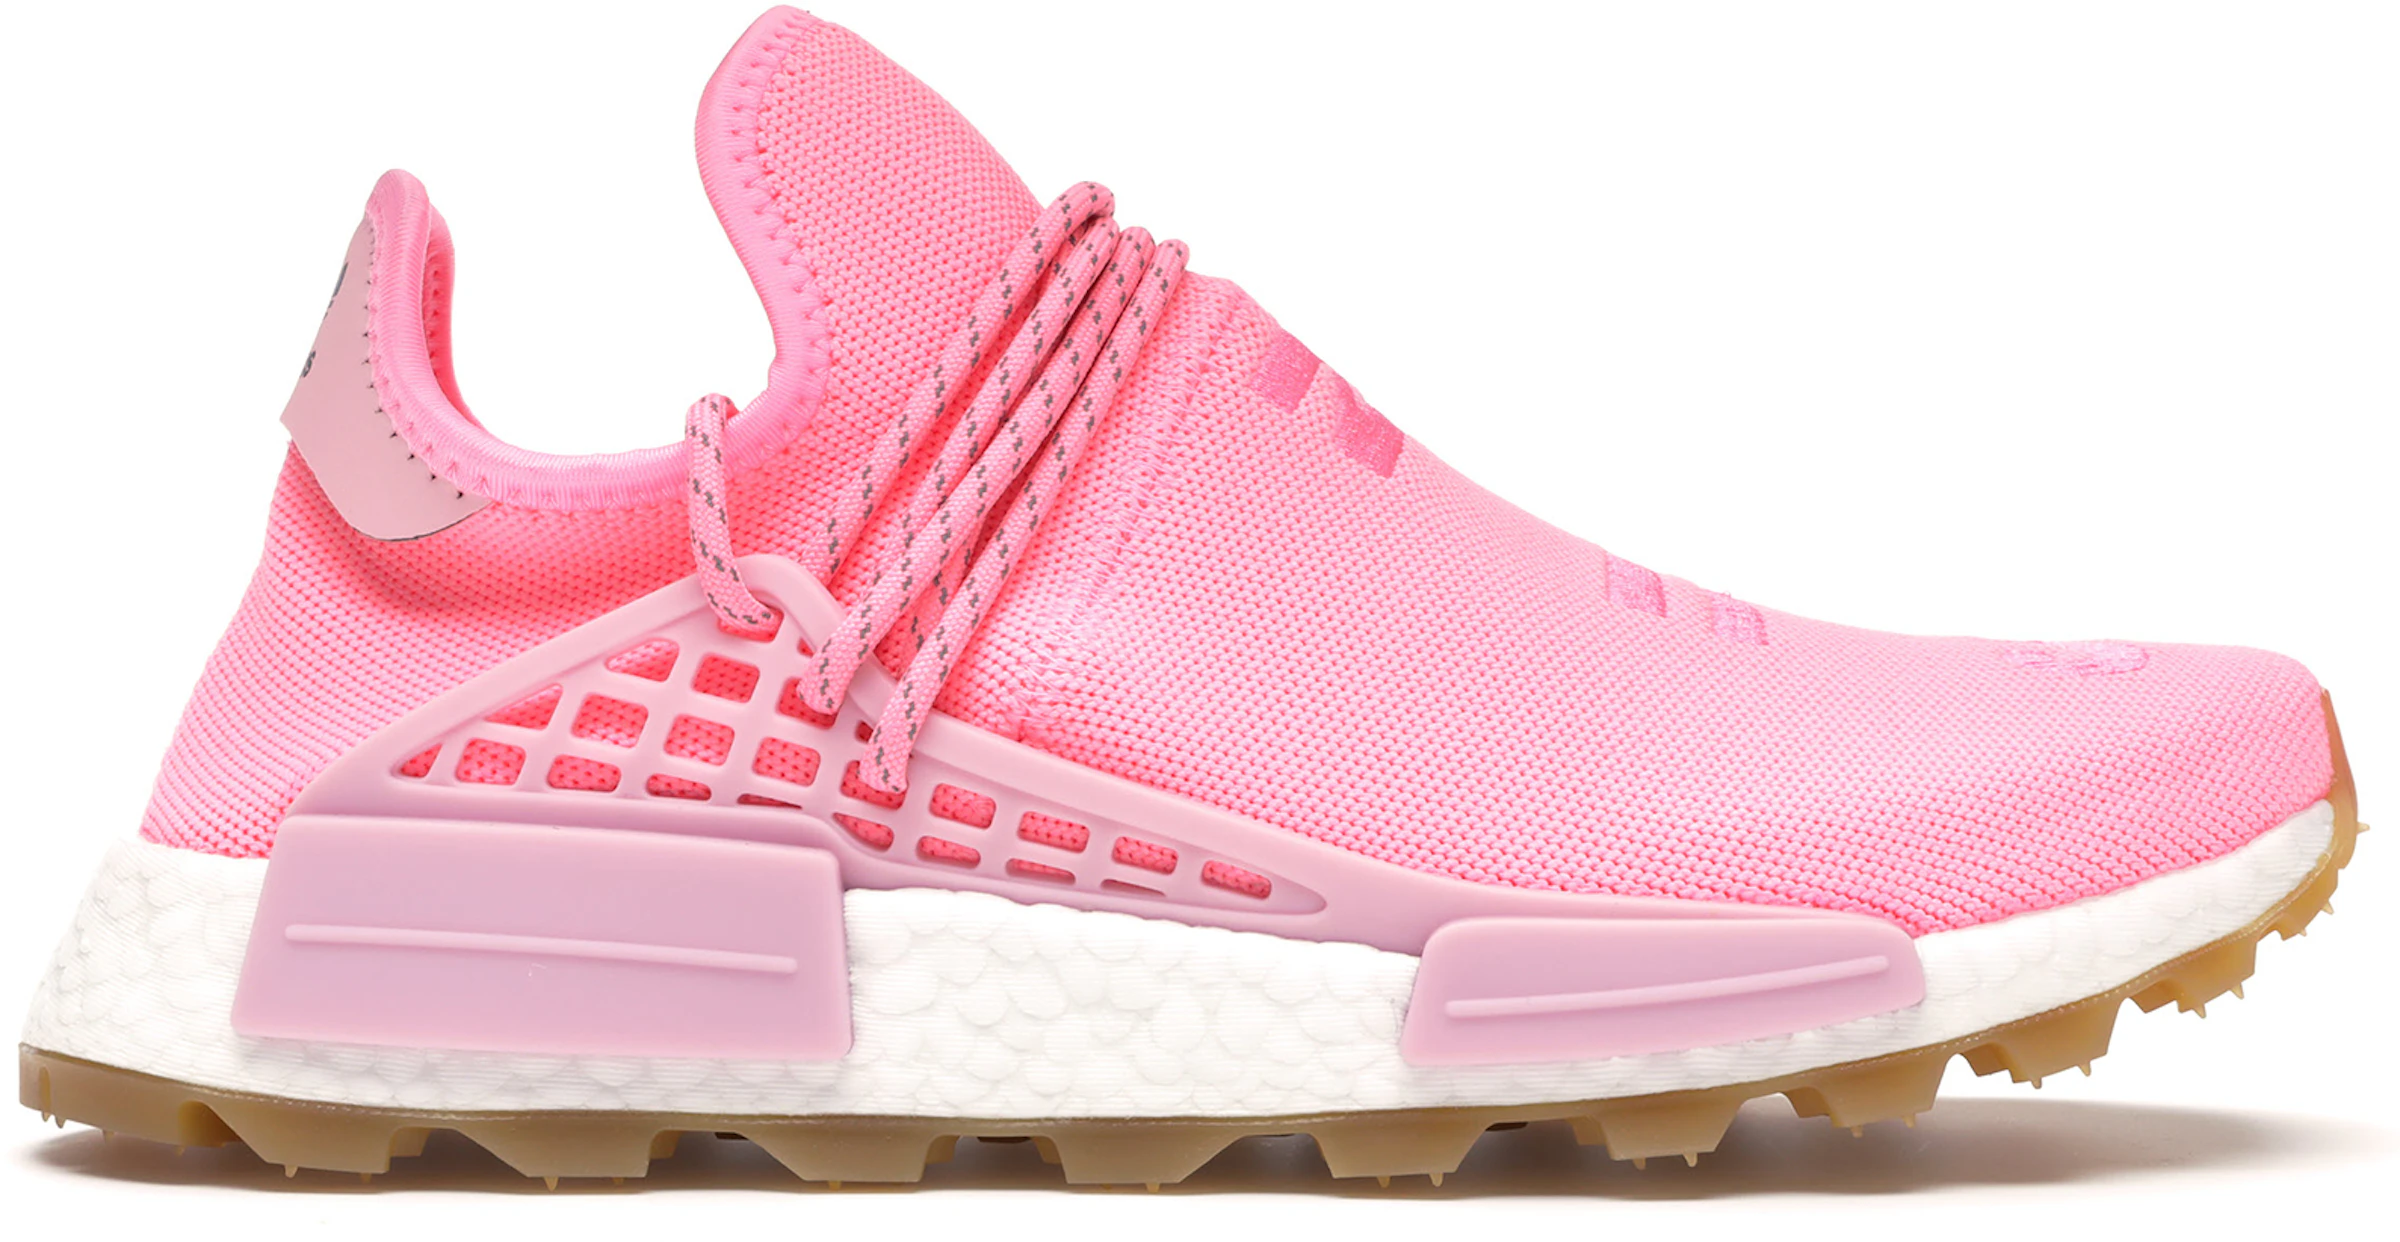 adidas NMD Hu Trail Now Her Time Light Pink EG7740 - ES